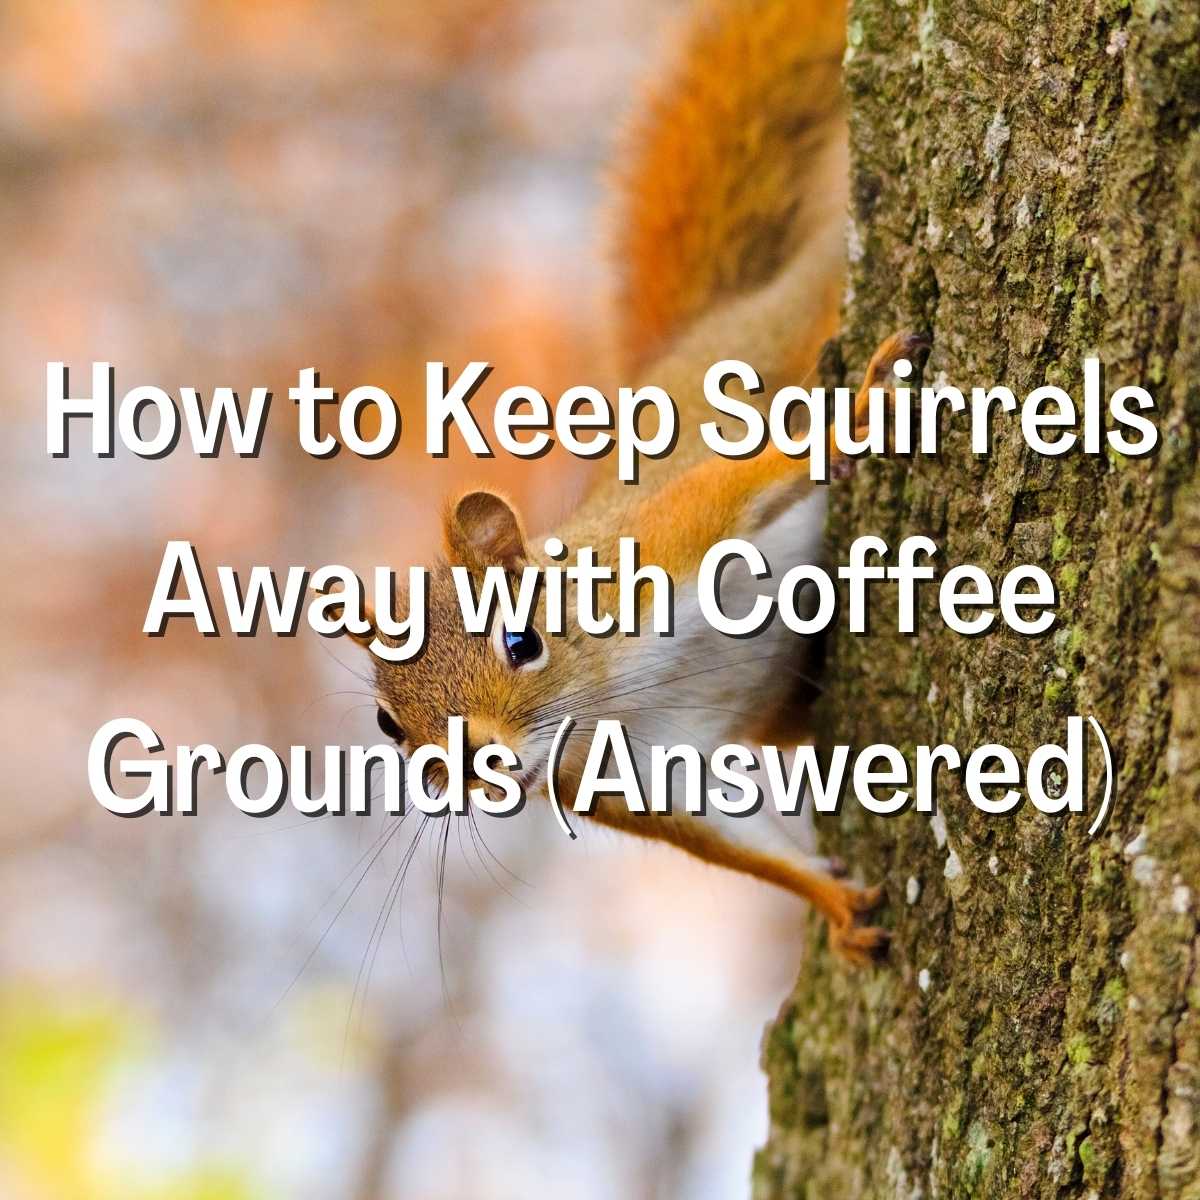 How to Keep Squirrels Away with Coffee Grounds